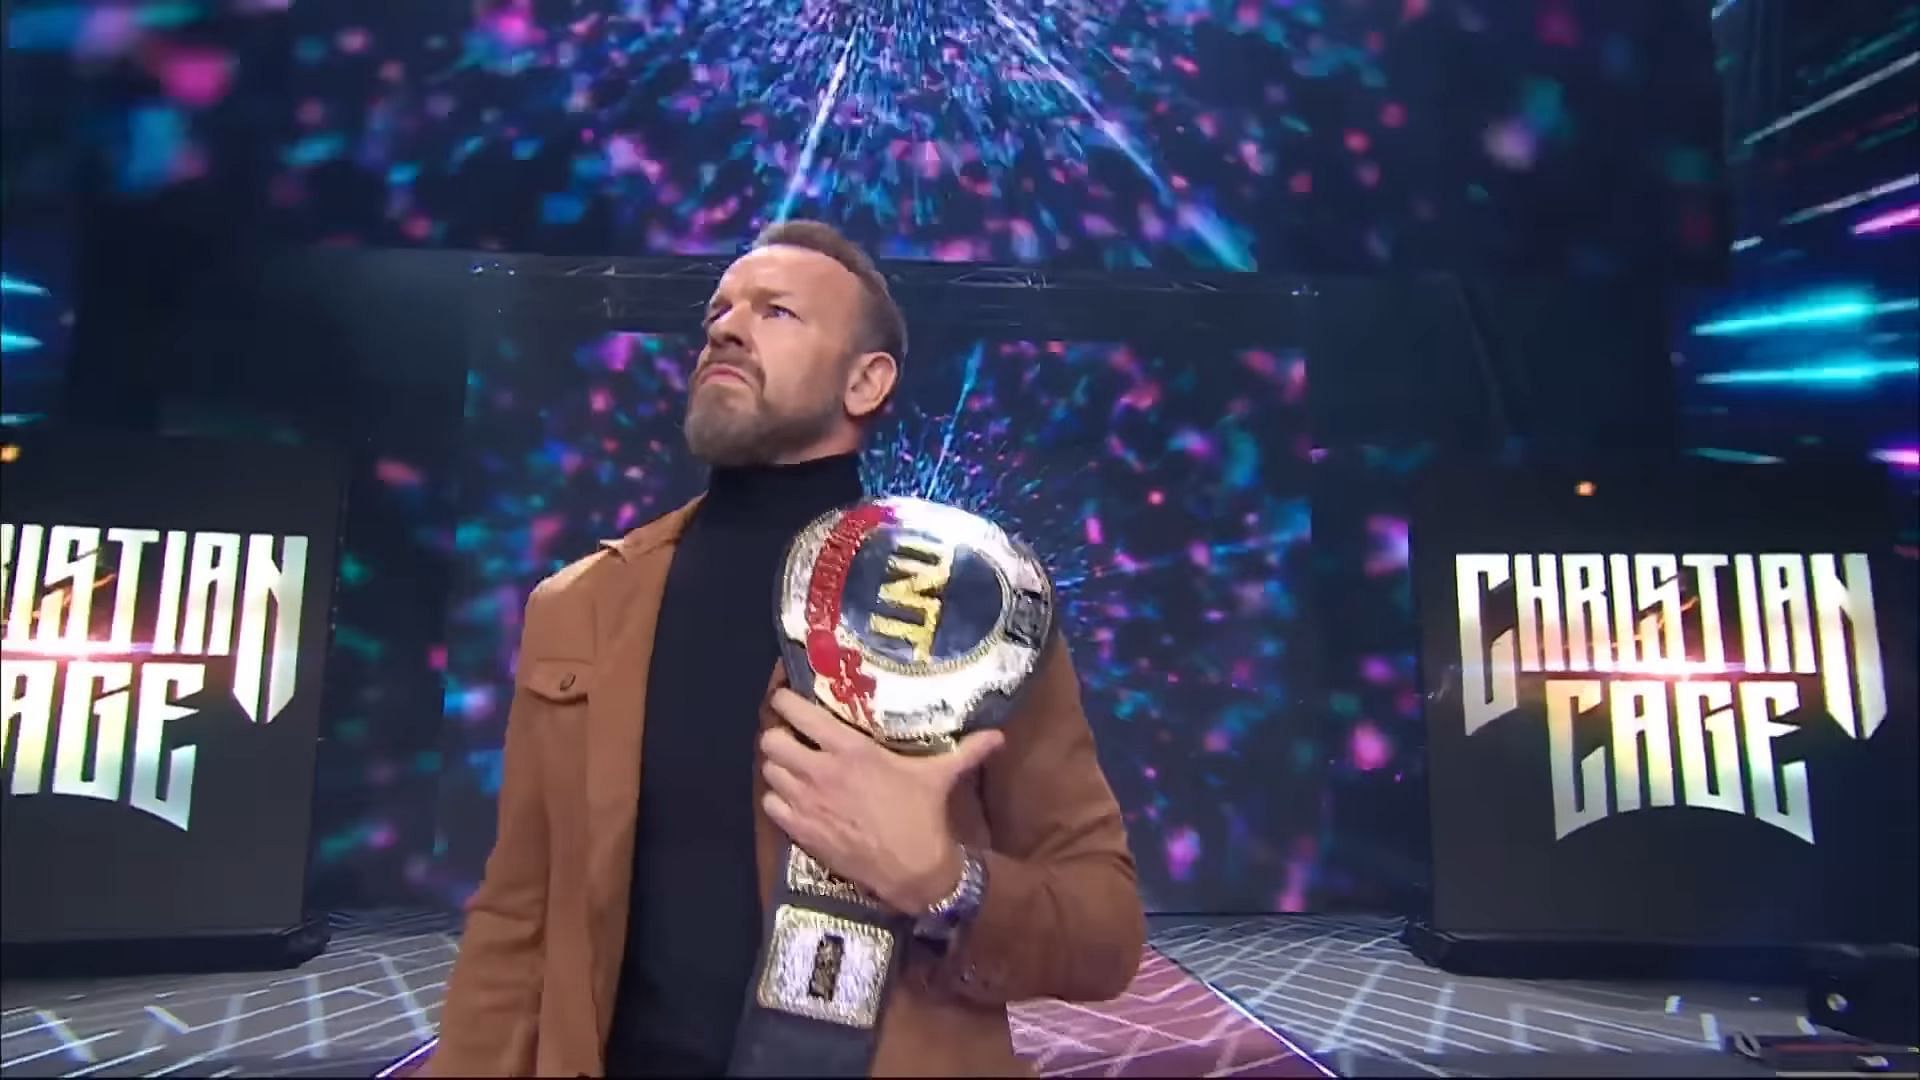 Christian Cage is a two time AEW TNT Champion